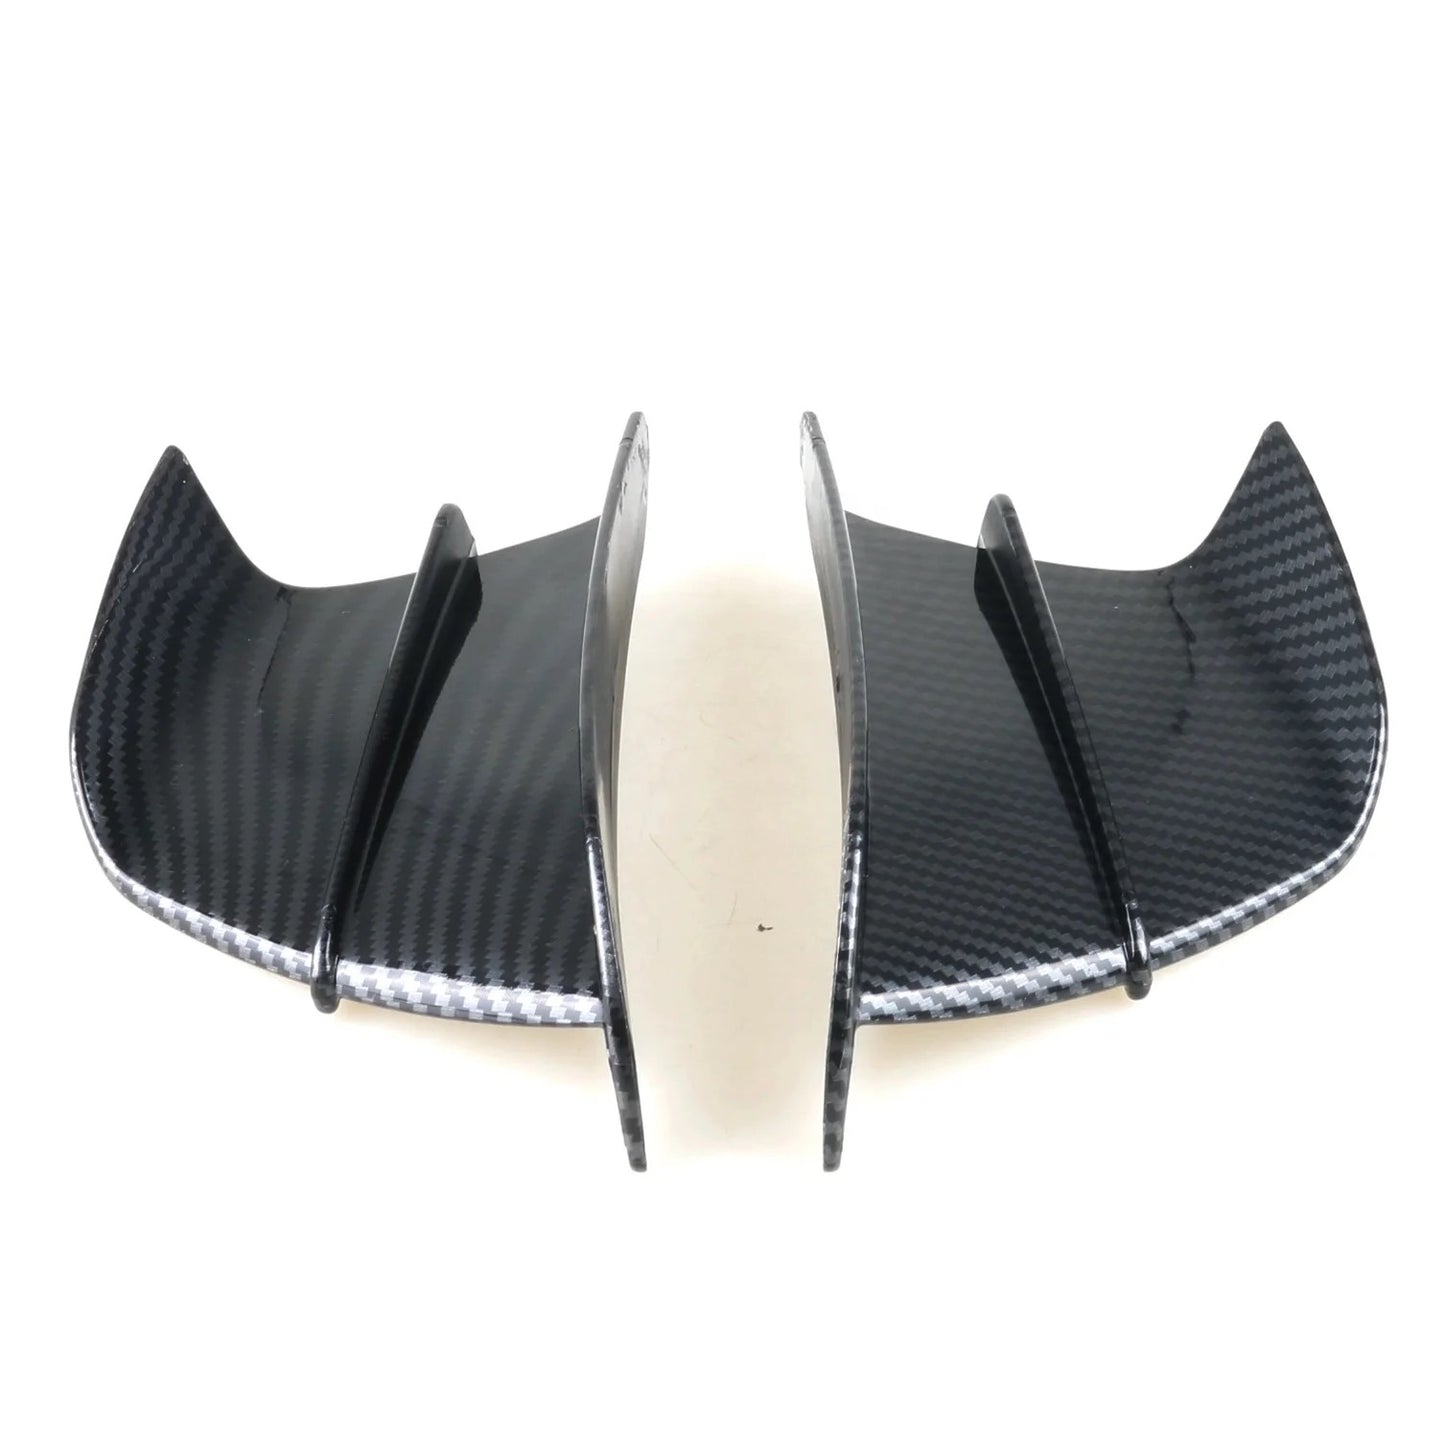 Motorcycle Modification Accessories Aerodynamic Fixed wind
Wing Kit Spoiler